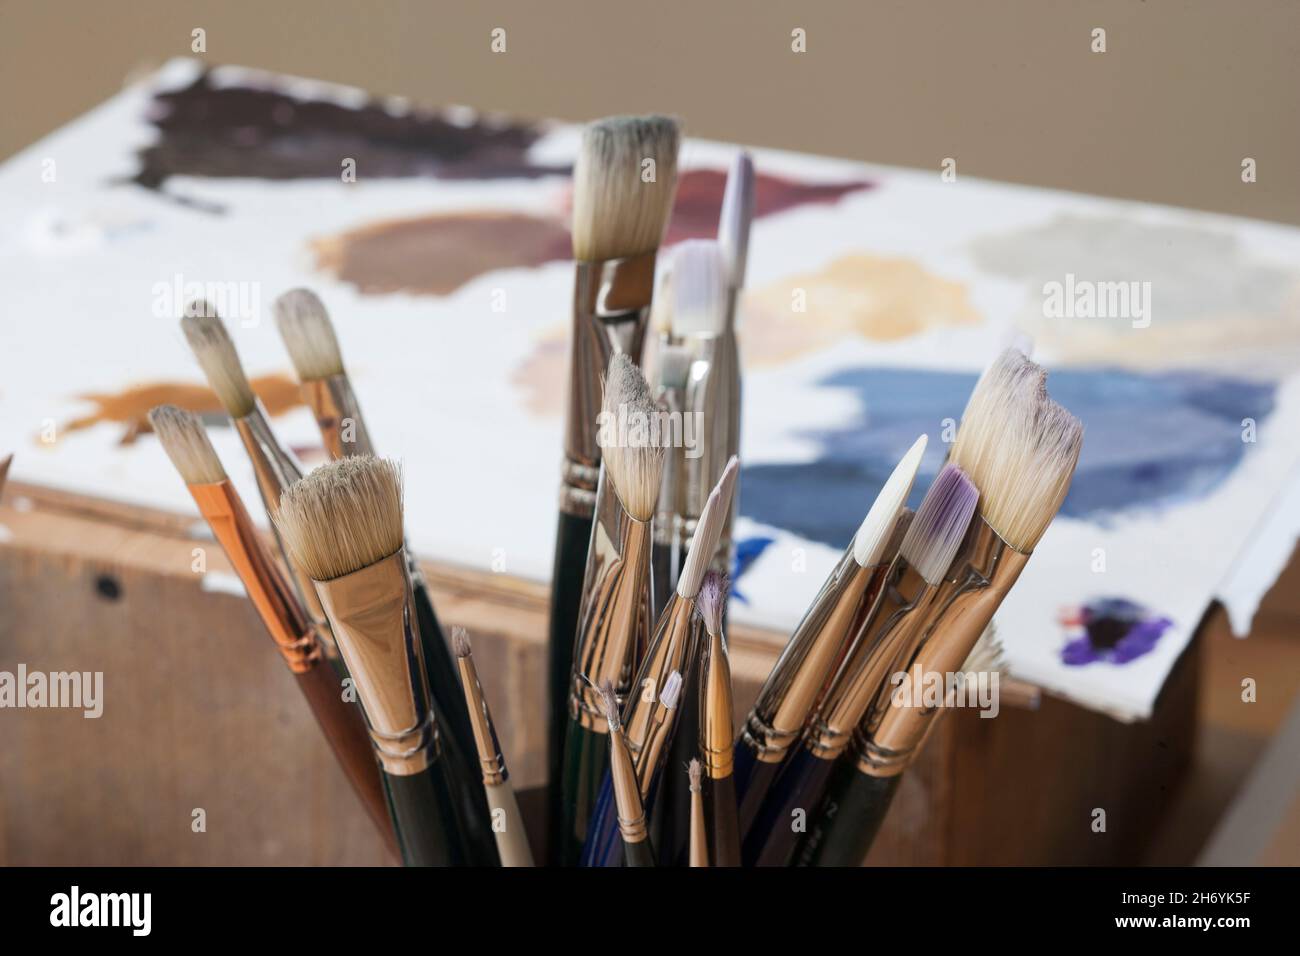 Artist's collection of paintbrushes Stock Photo